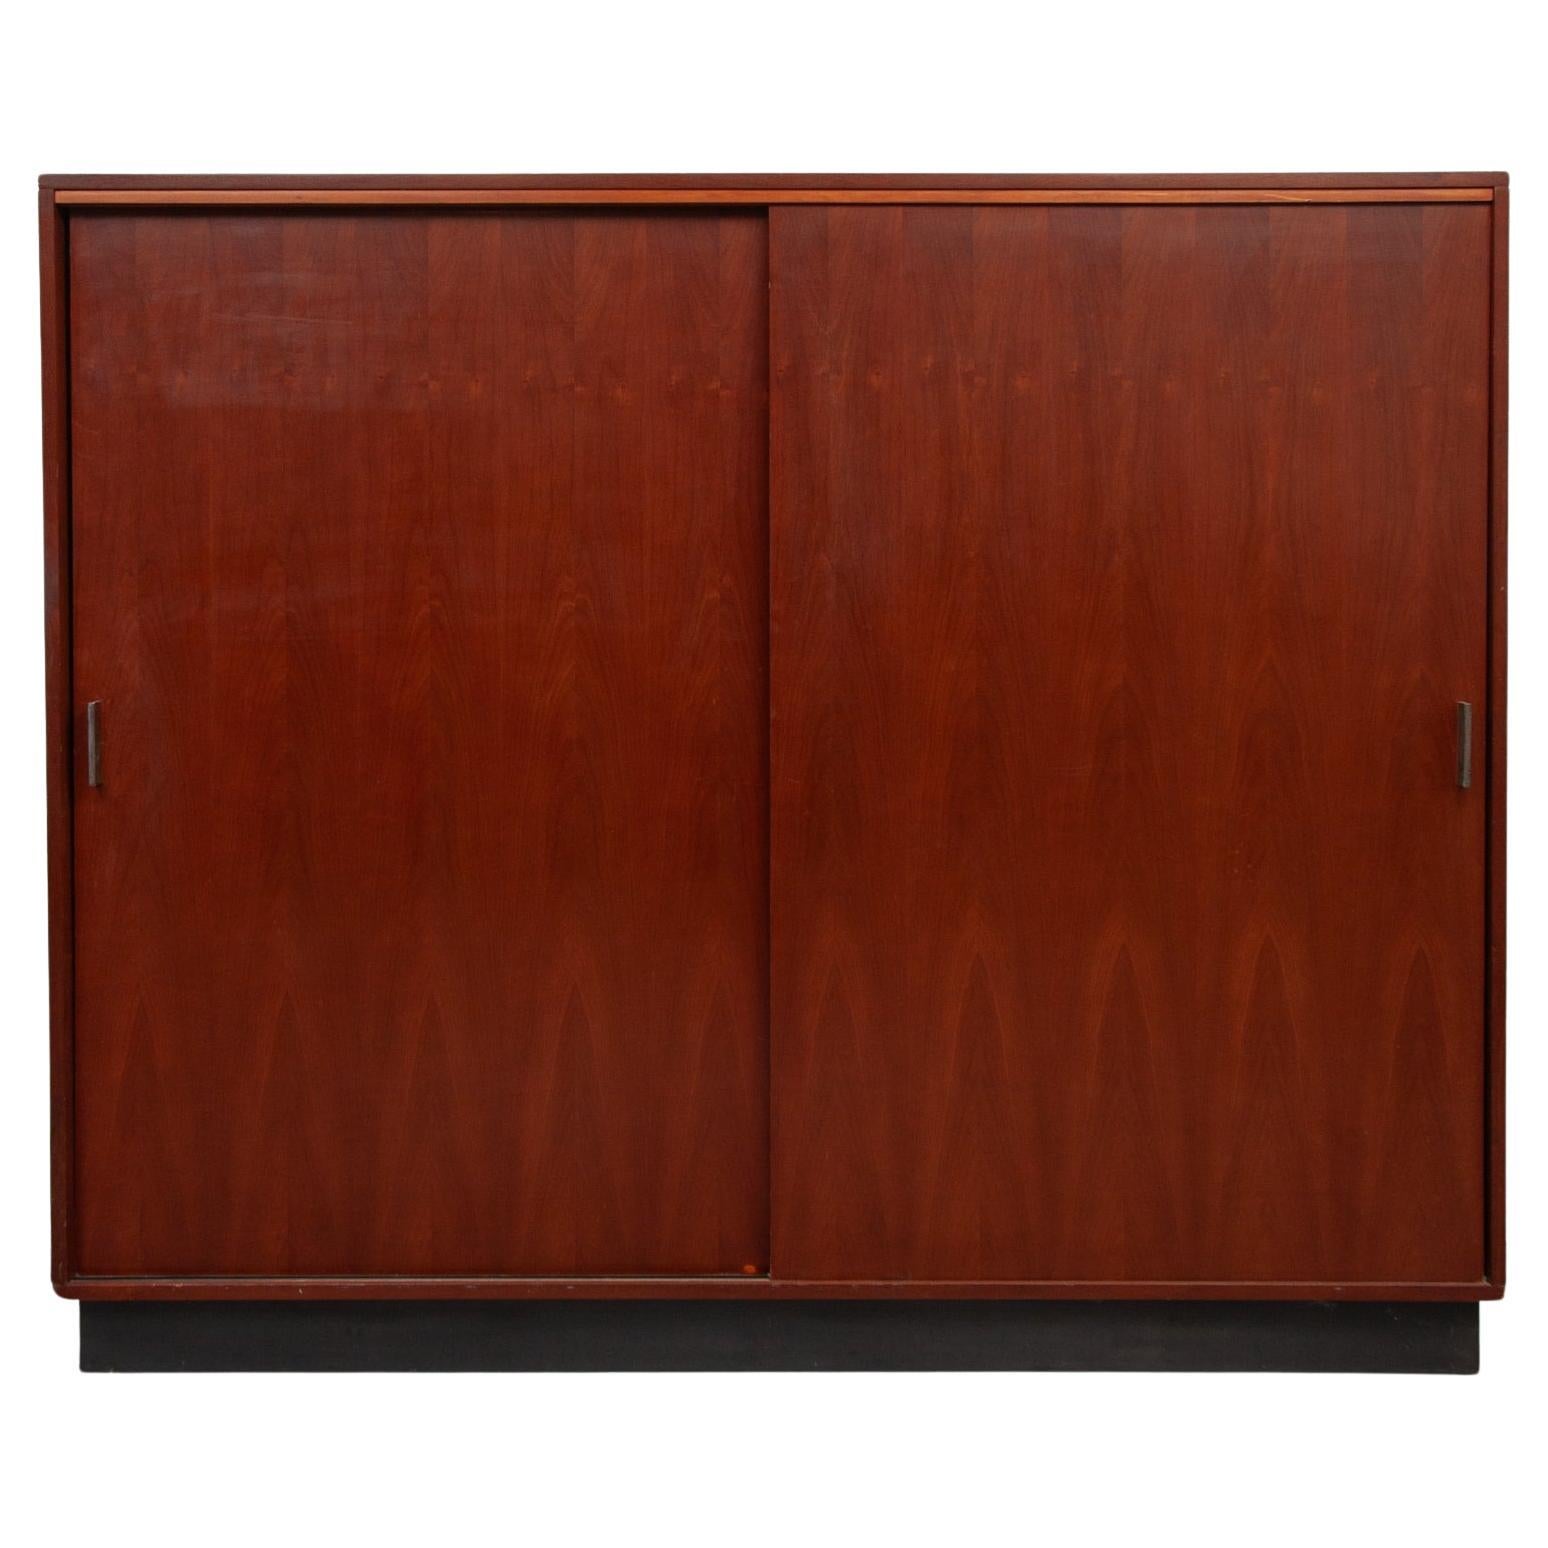 Two Sliding Doors Wardrobe designed by Alfred Hendrickx, Belgium, 1960s For Sale